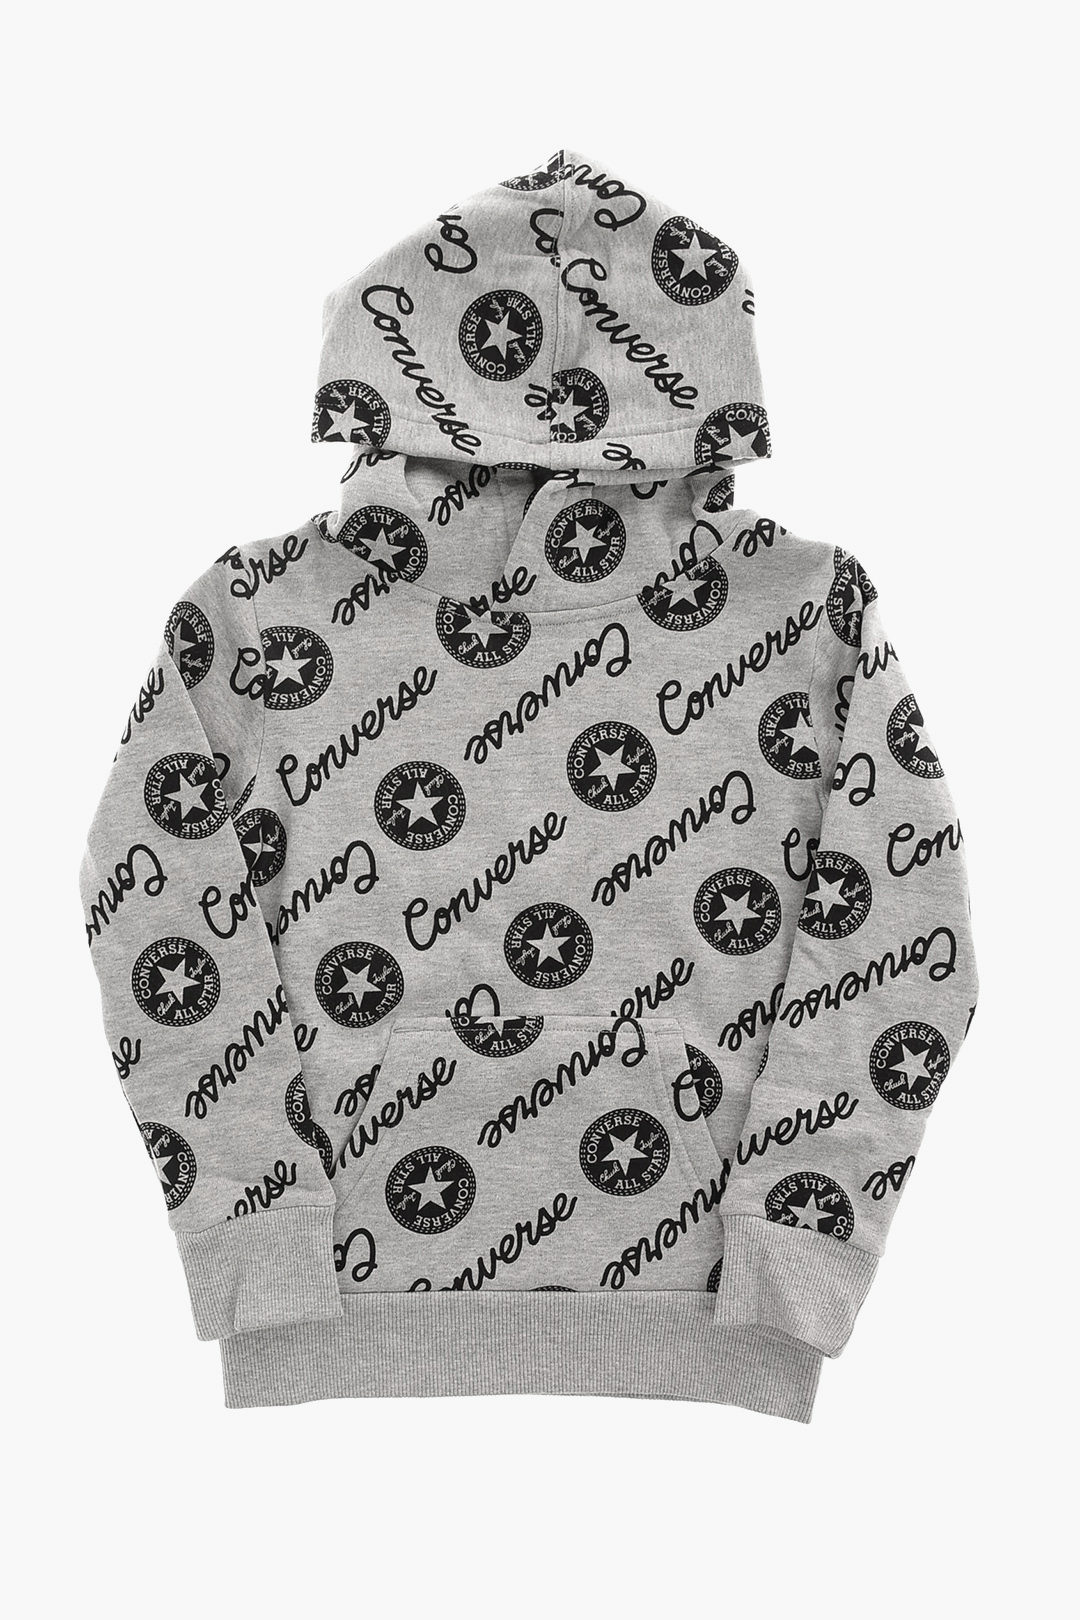 All Over Sweatshirt Logo - KIDS Hood ALL with Outlet Glamood Converse boys STAR